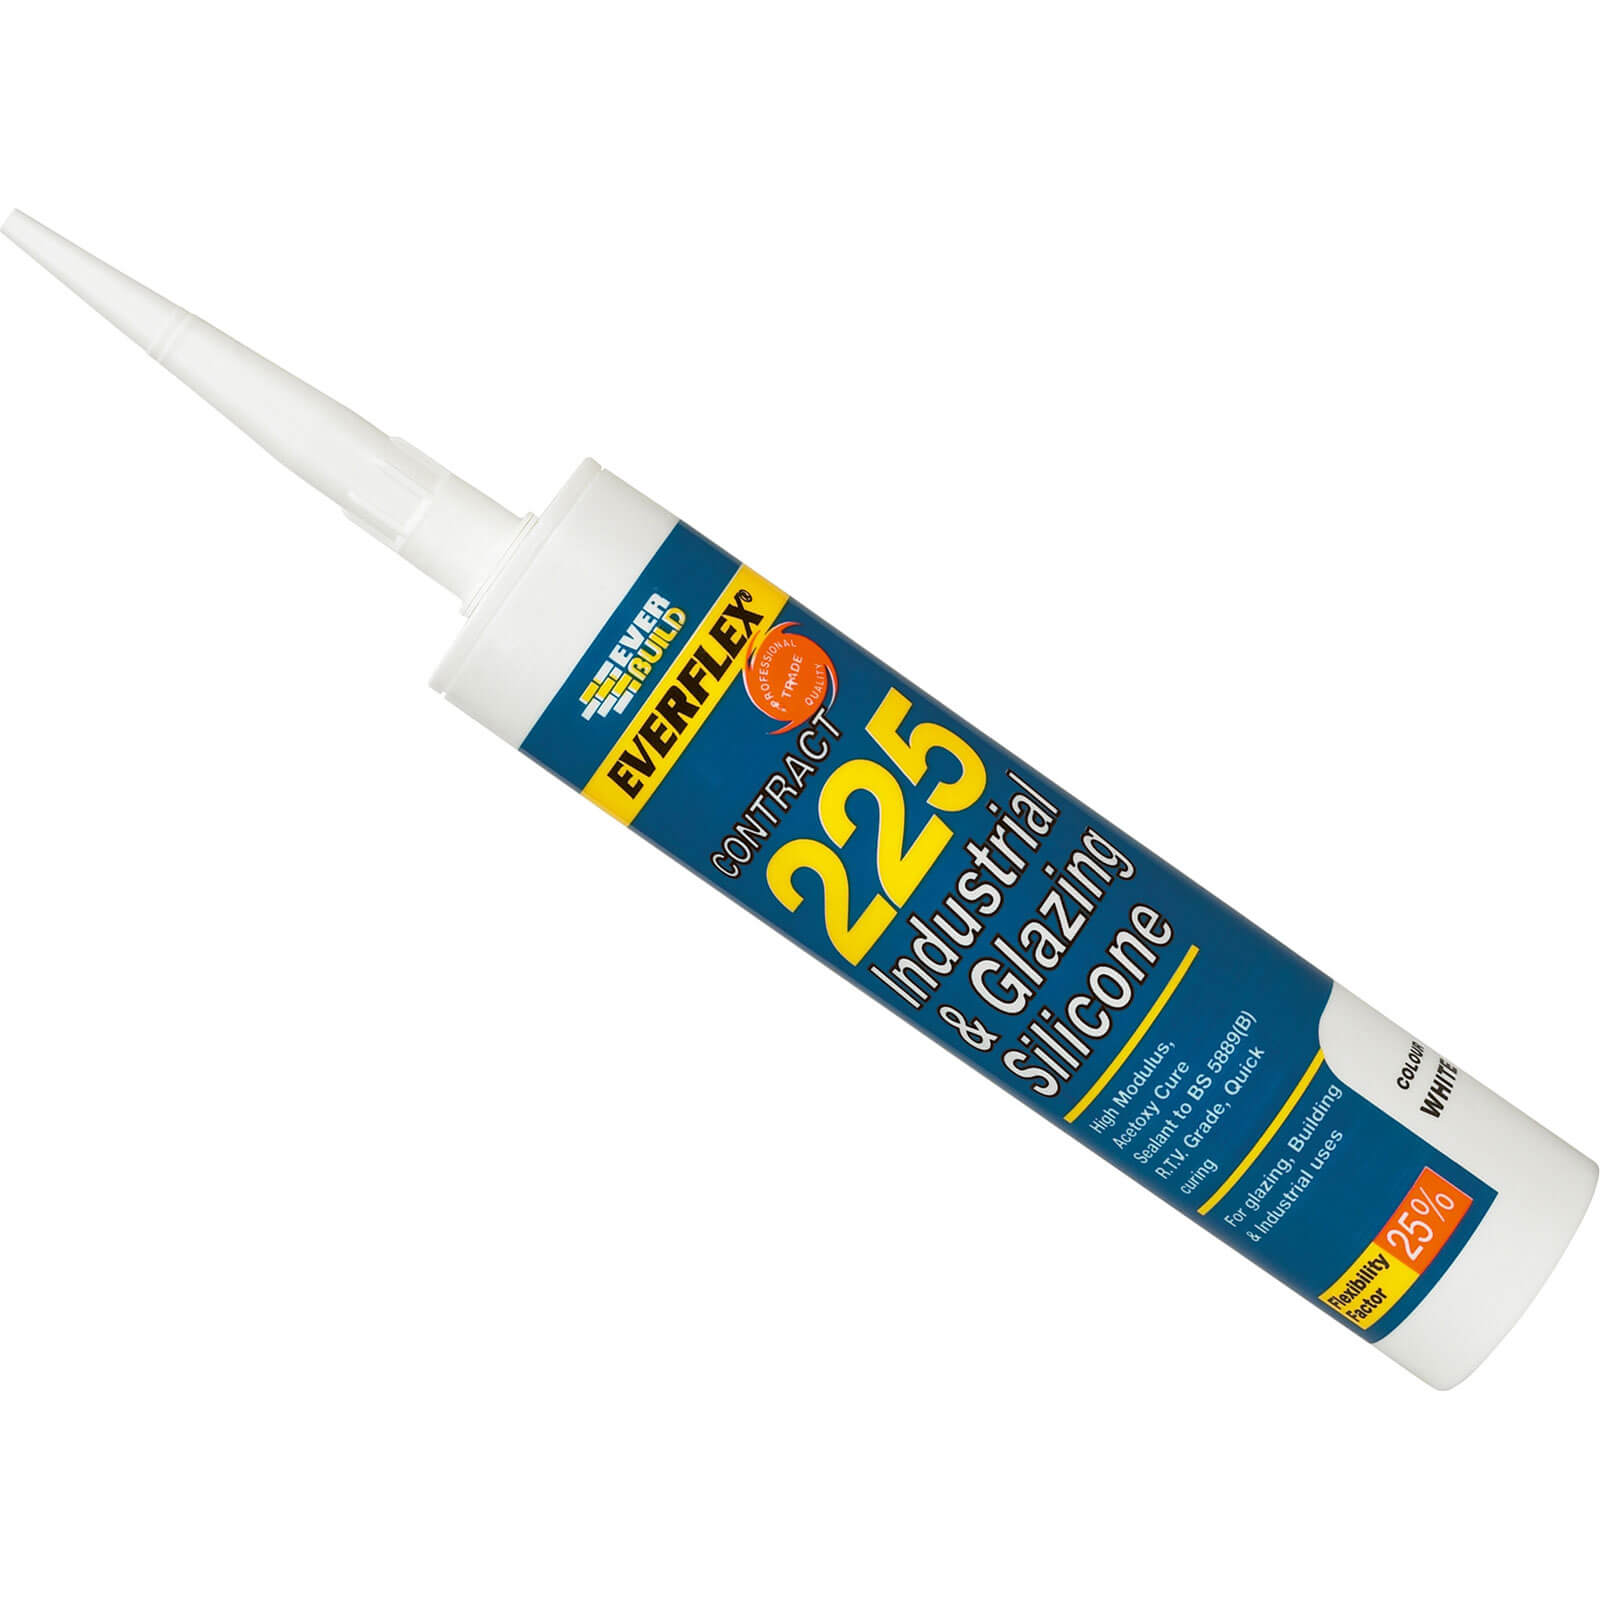 Photos - Sealant / Adhesive Everbuild Industrial and Glazing Silicone Brushed Steel 310ml EVB225STEEL 